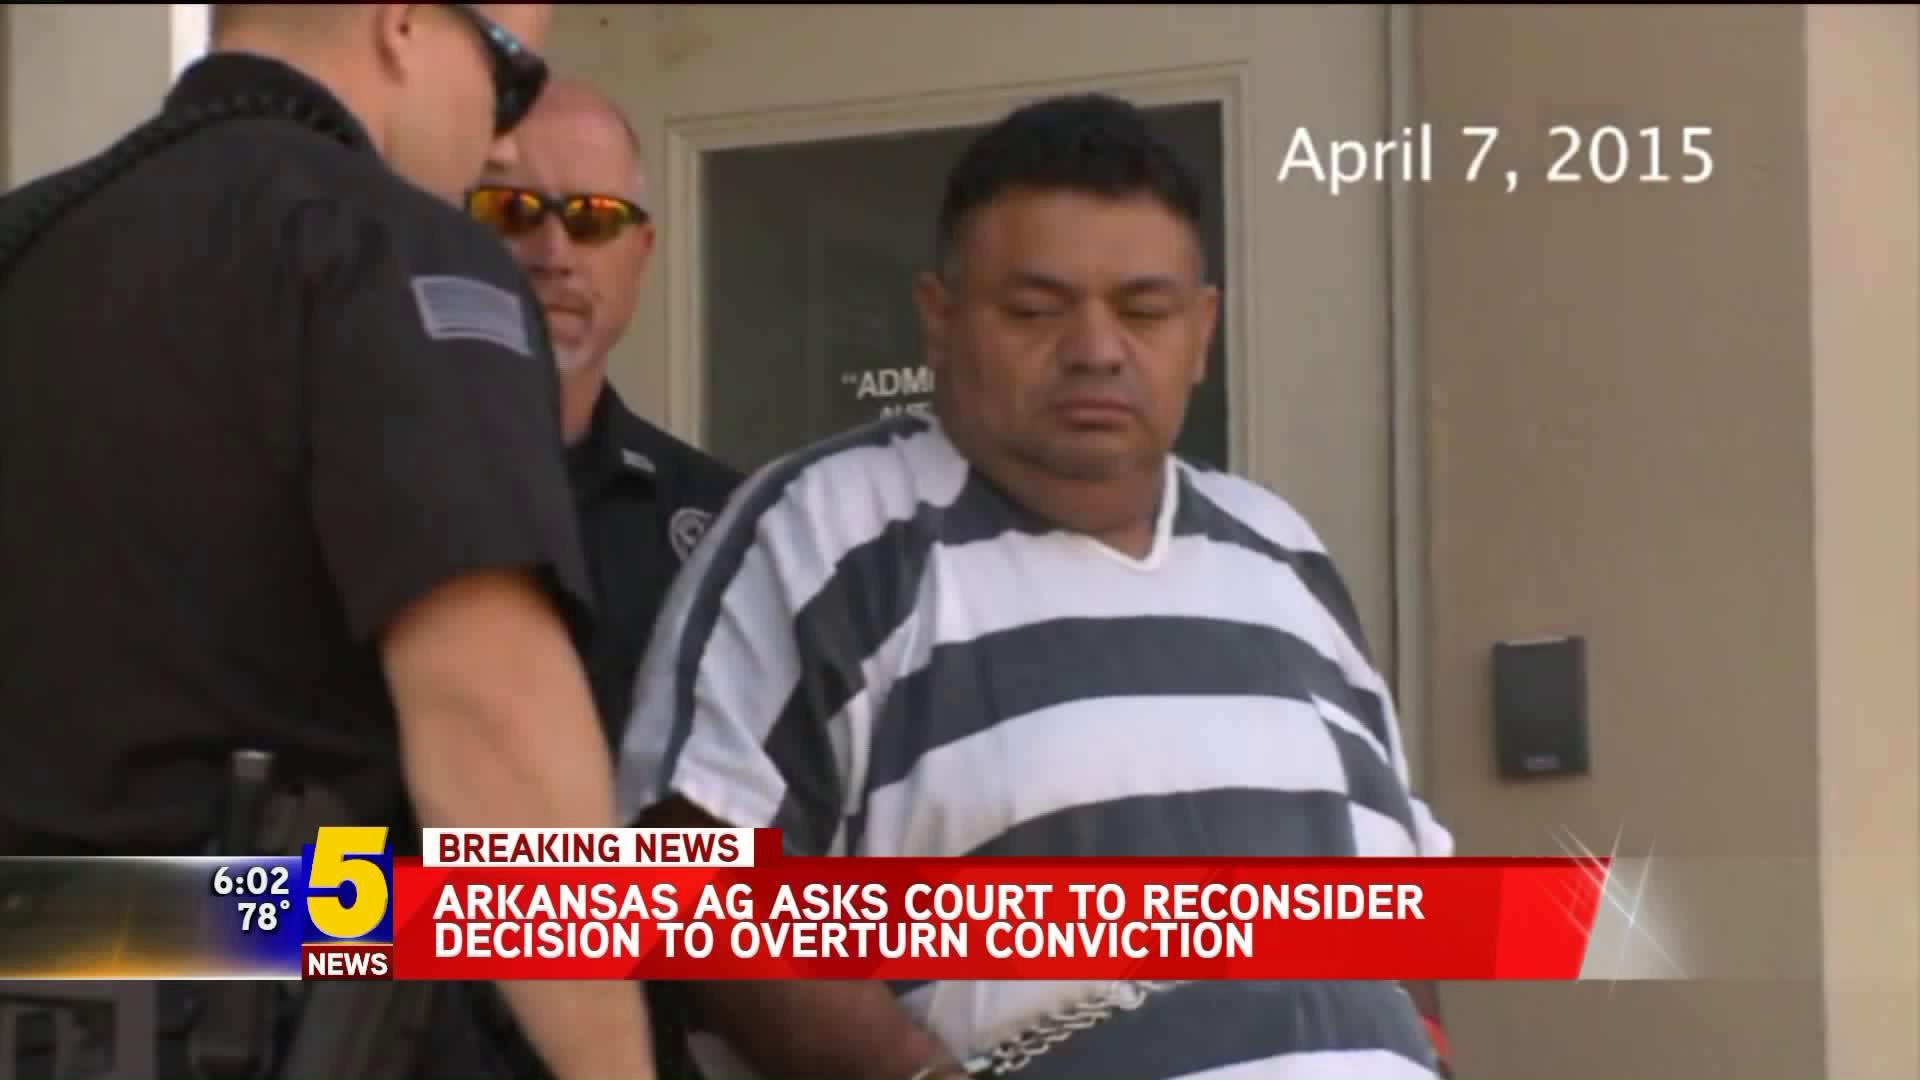 Arkansas AG Asks Court To Reconsider Decision To Overturn Conviction